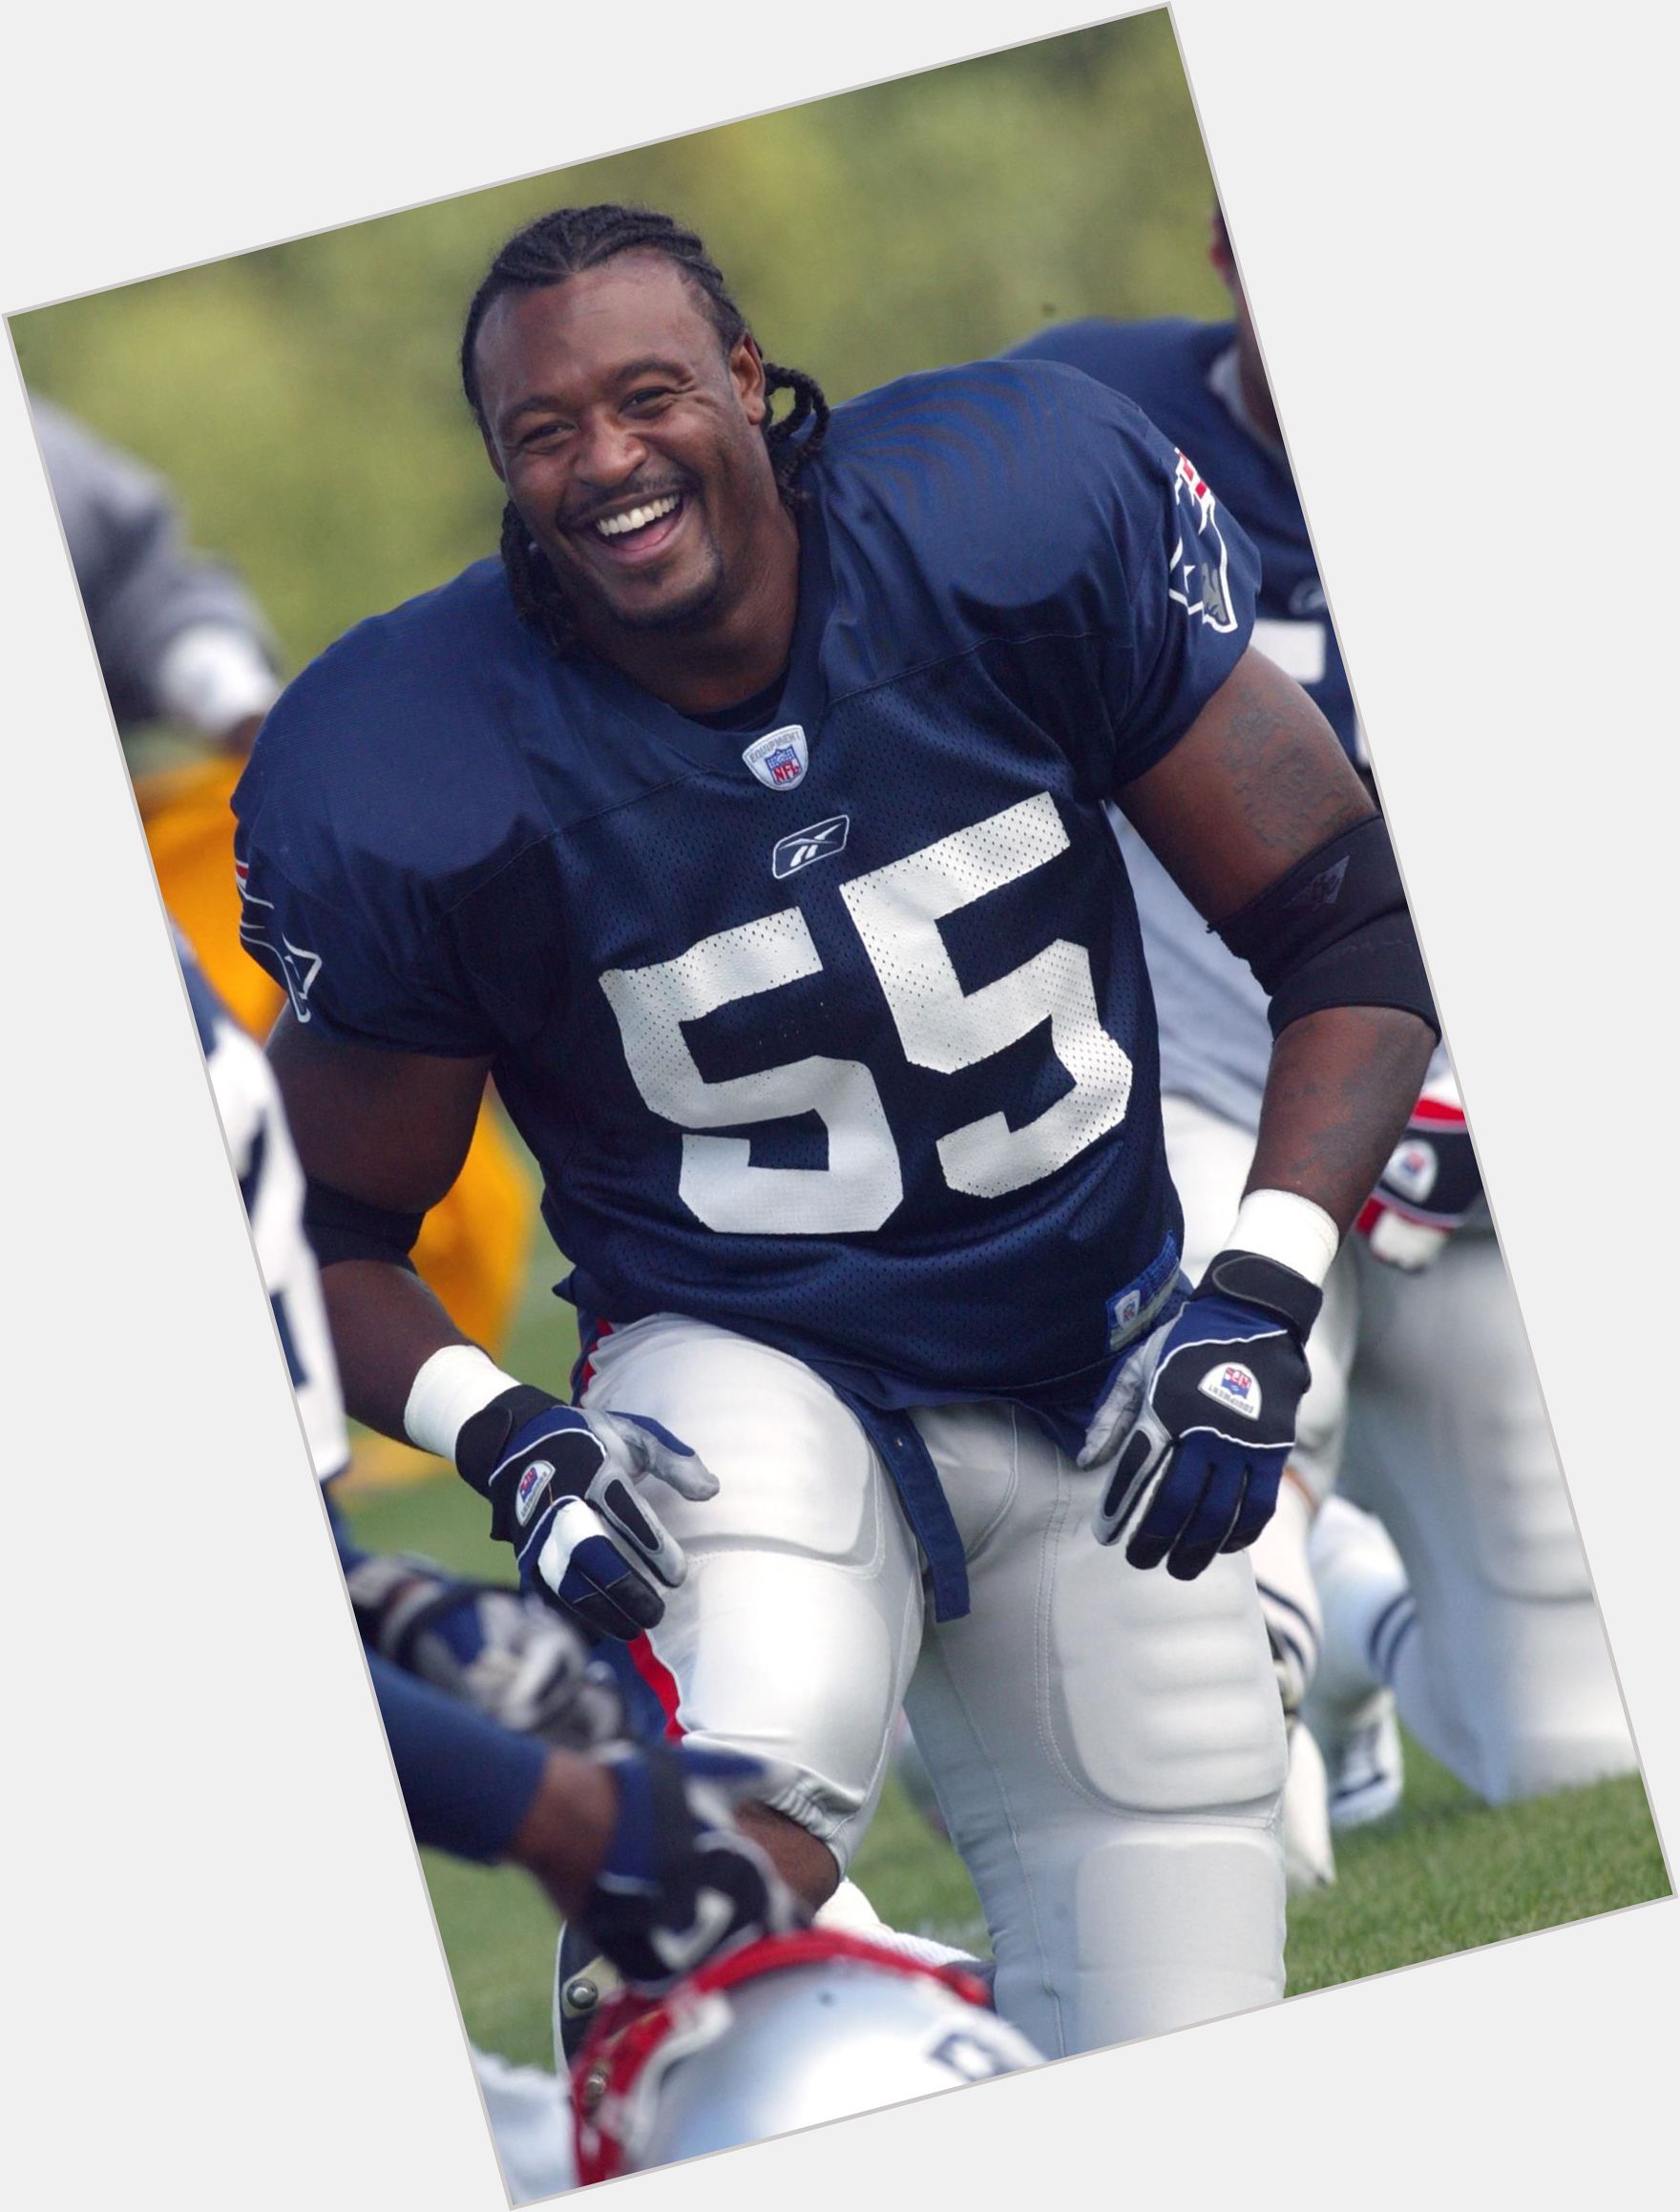 Willie Mcginest Athletic body,  black hair & hairstyles